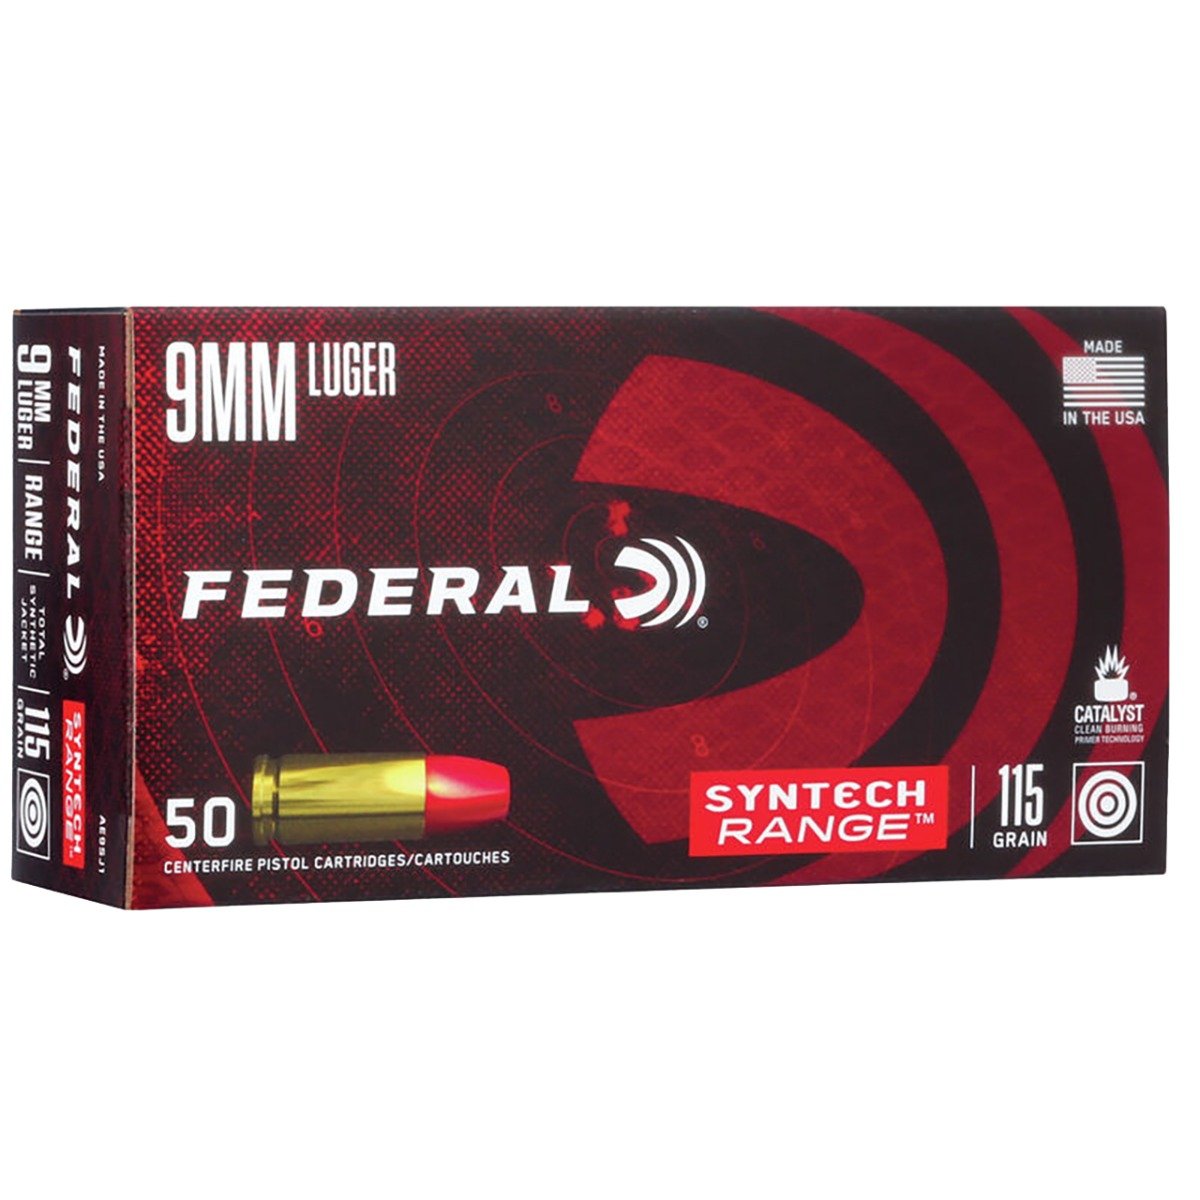 Federal Syntech Range Luger Jacket Ammo